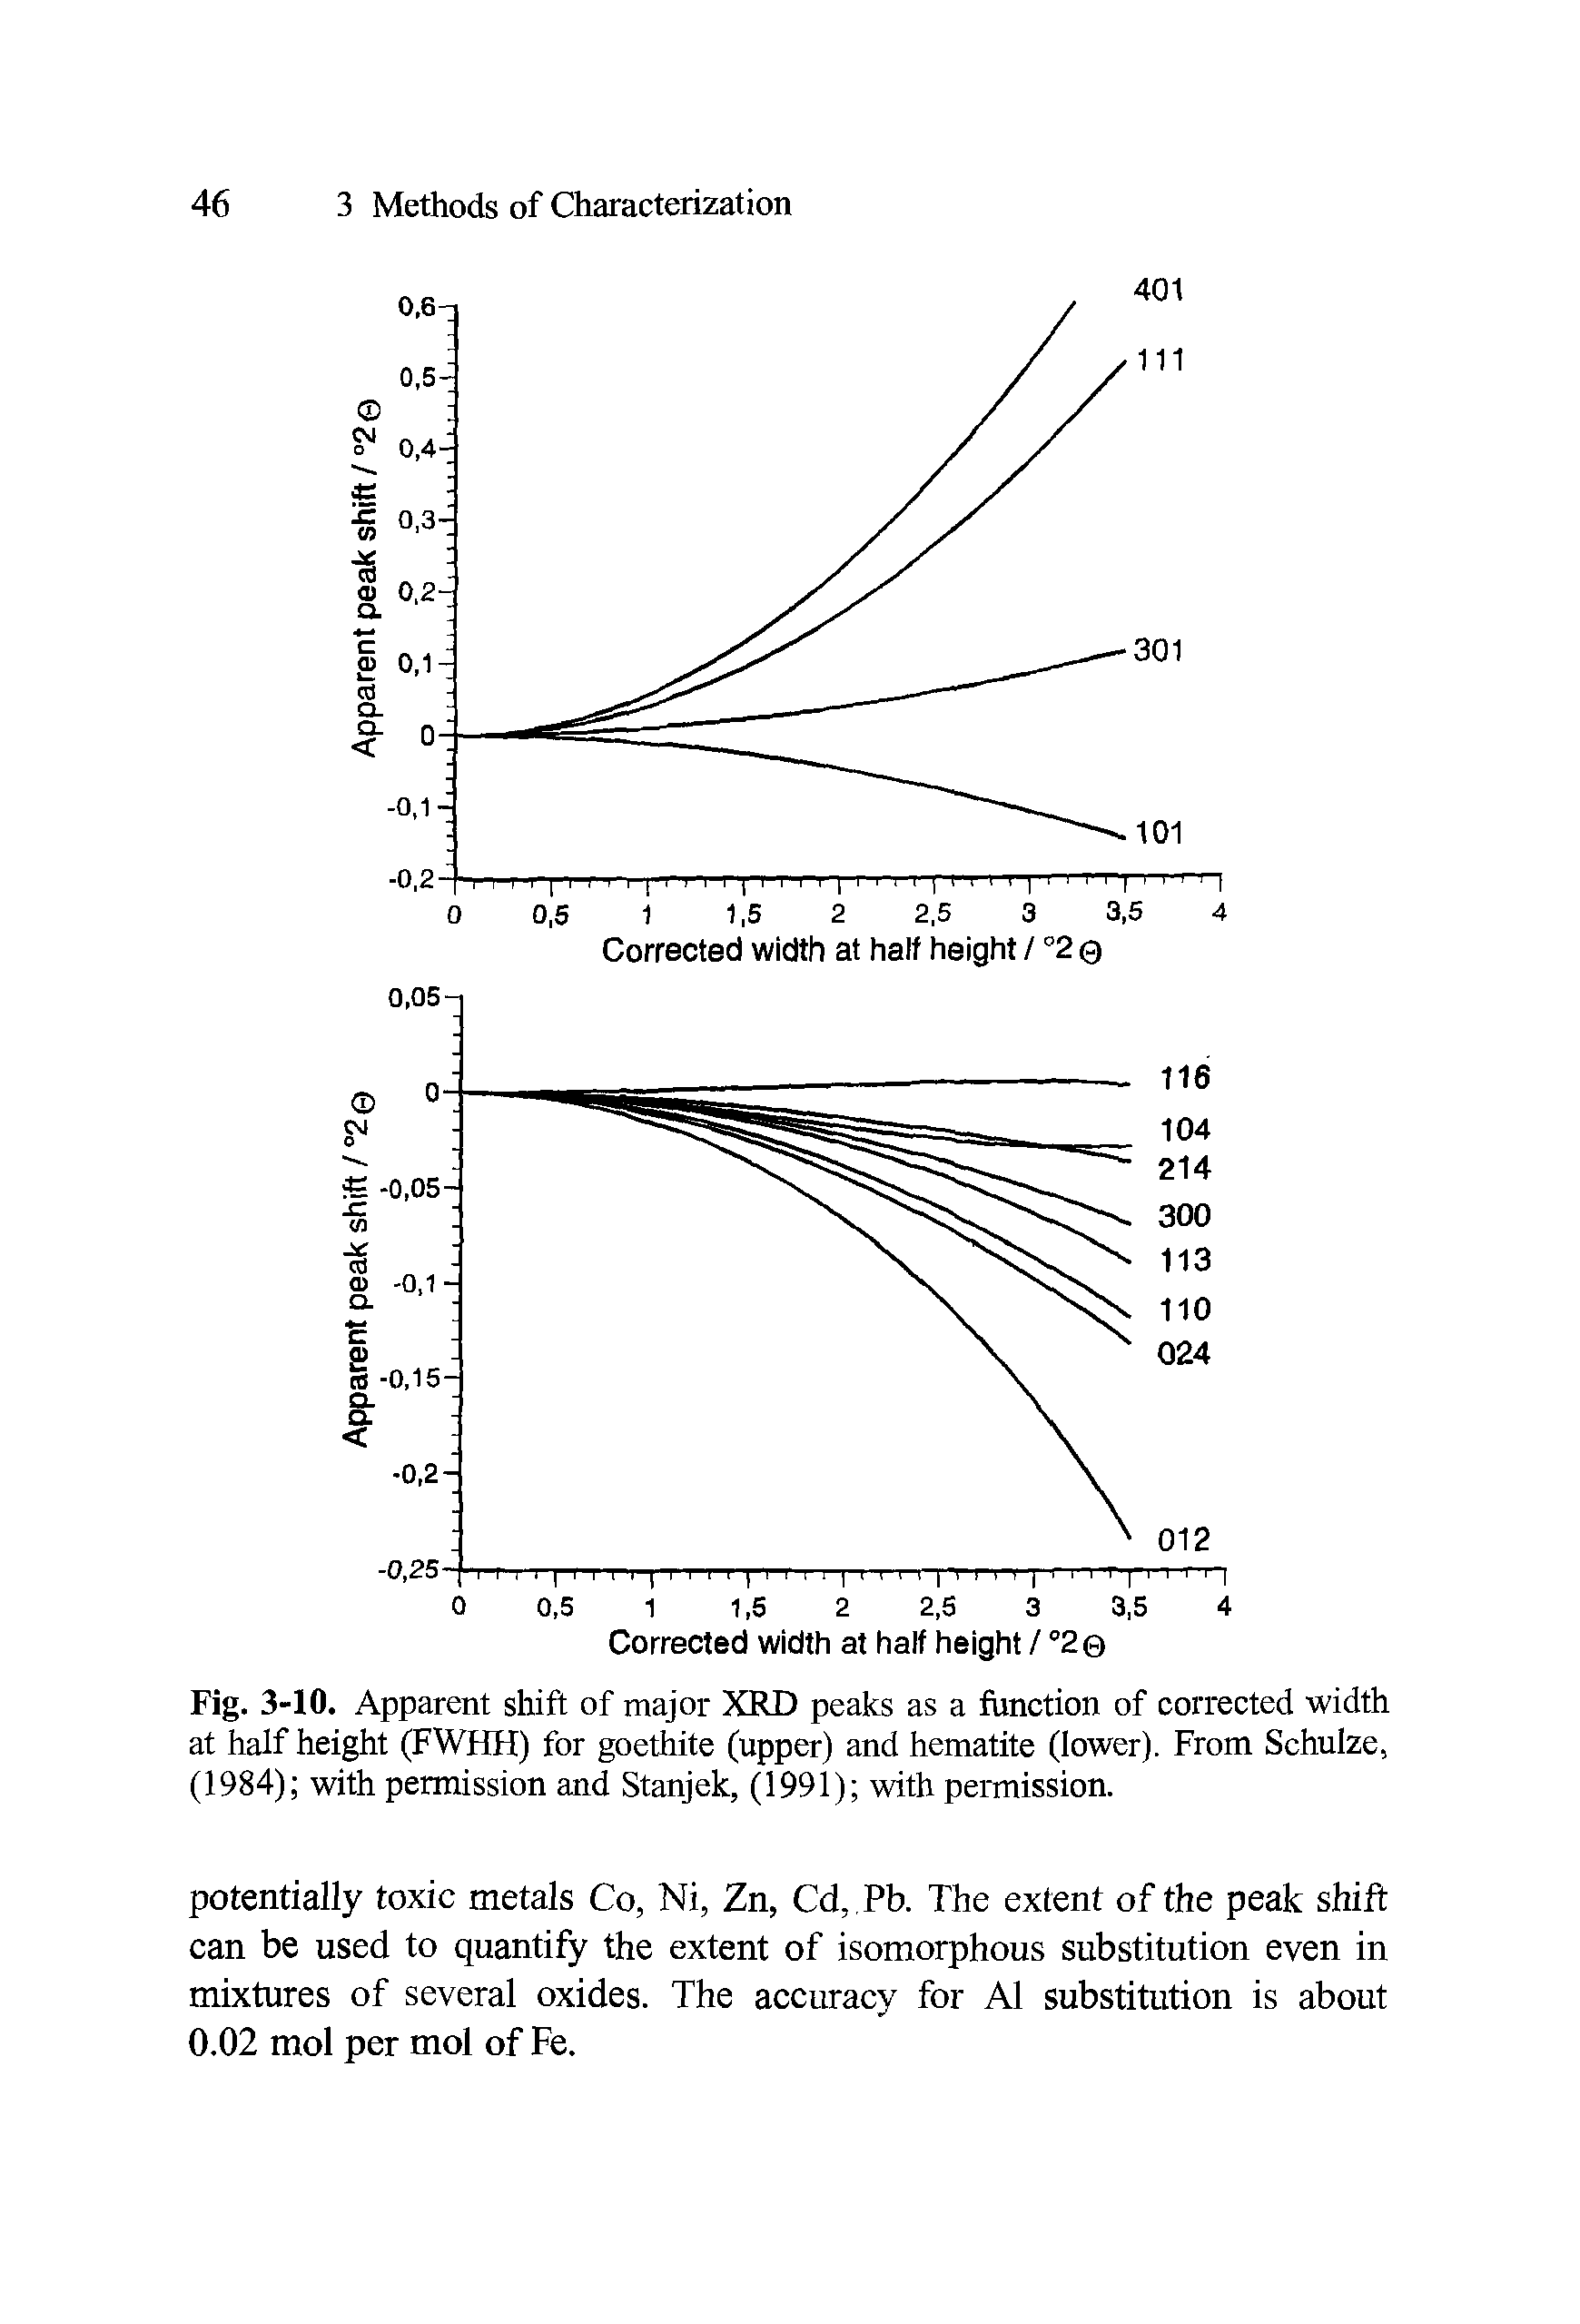 Fig. 3-10. Apparent shift of major XRD peaks as a function of corrected width at half height (FWHH) for goethite (upper) and hematite (lower). From Schulze, (1984) with permission and Stanjek, (1991) with permission.